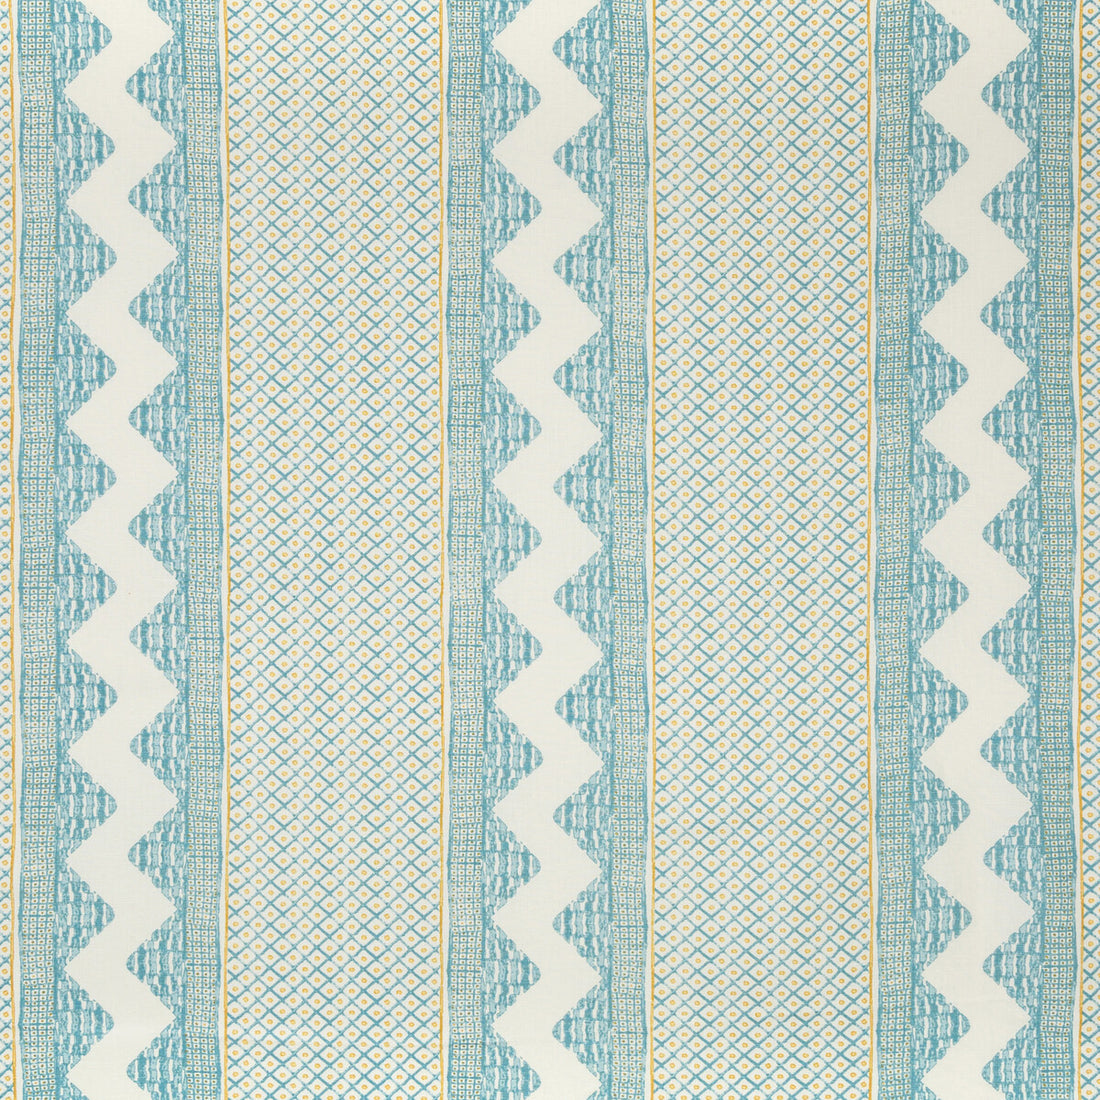 Whitaker Print fabric in ocean/gold color - pattern 2020188.134.0 - by Lee Jofa in the Avondale collection